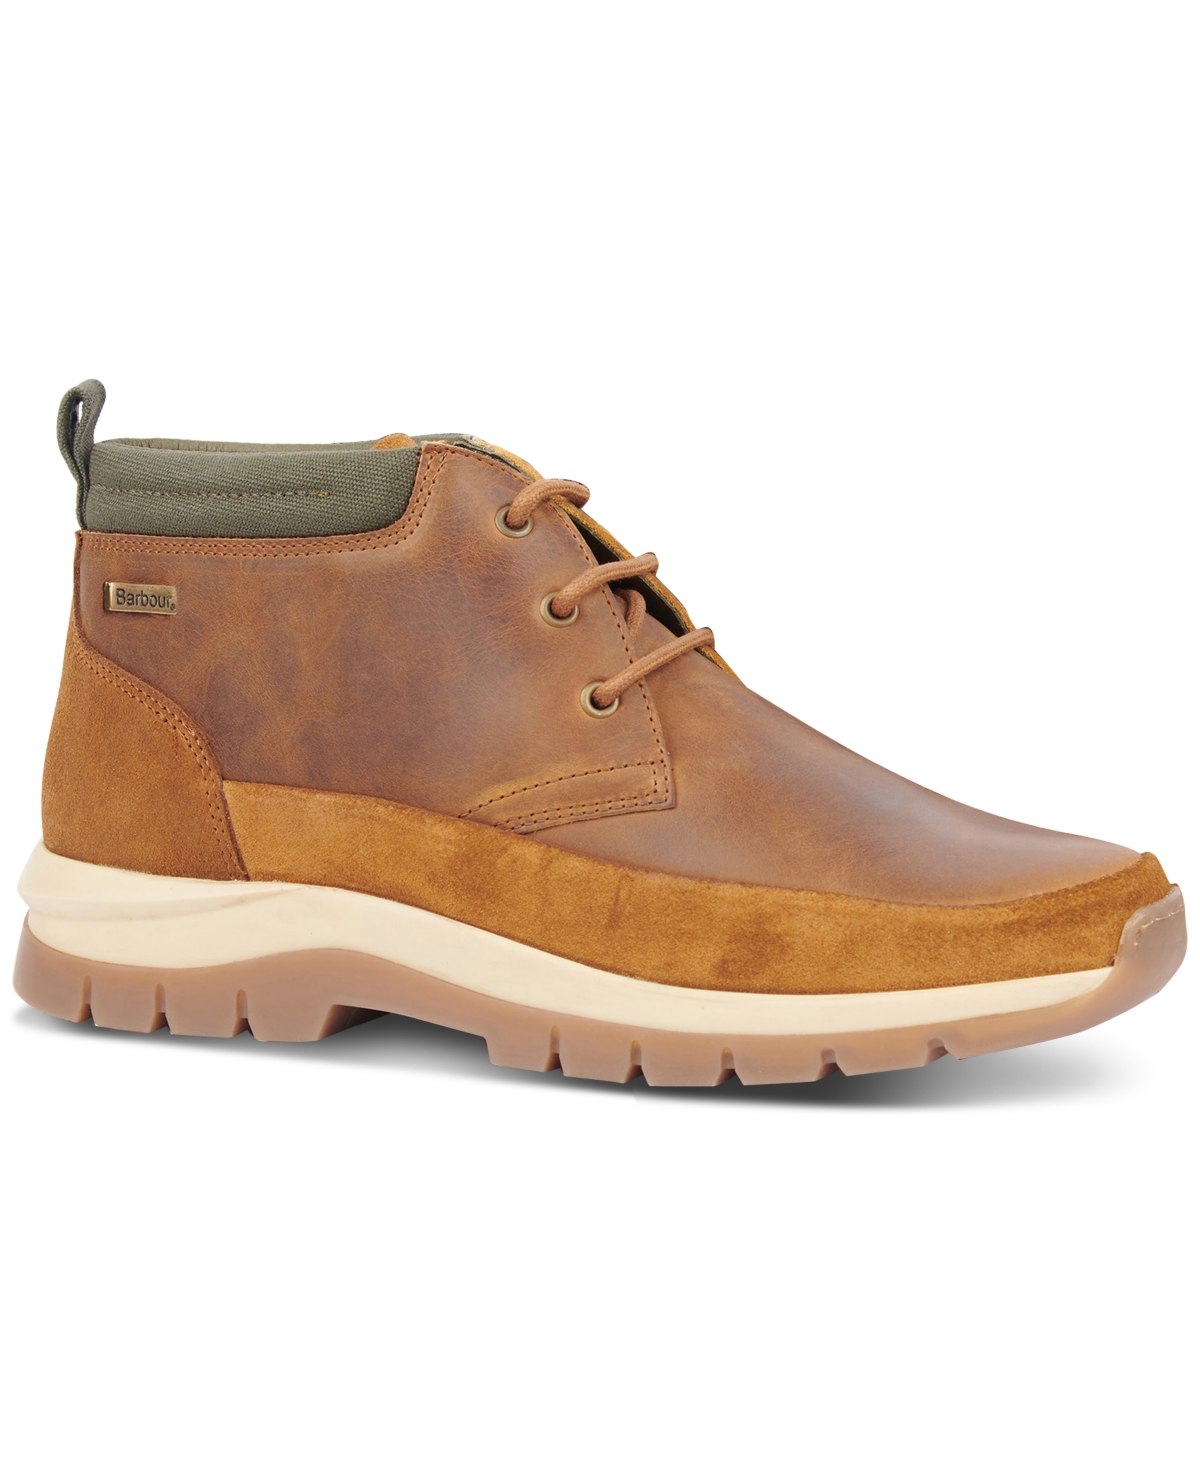 Men's Underwood Lace-up Boot - Choco